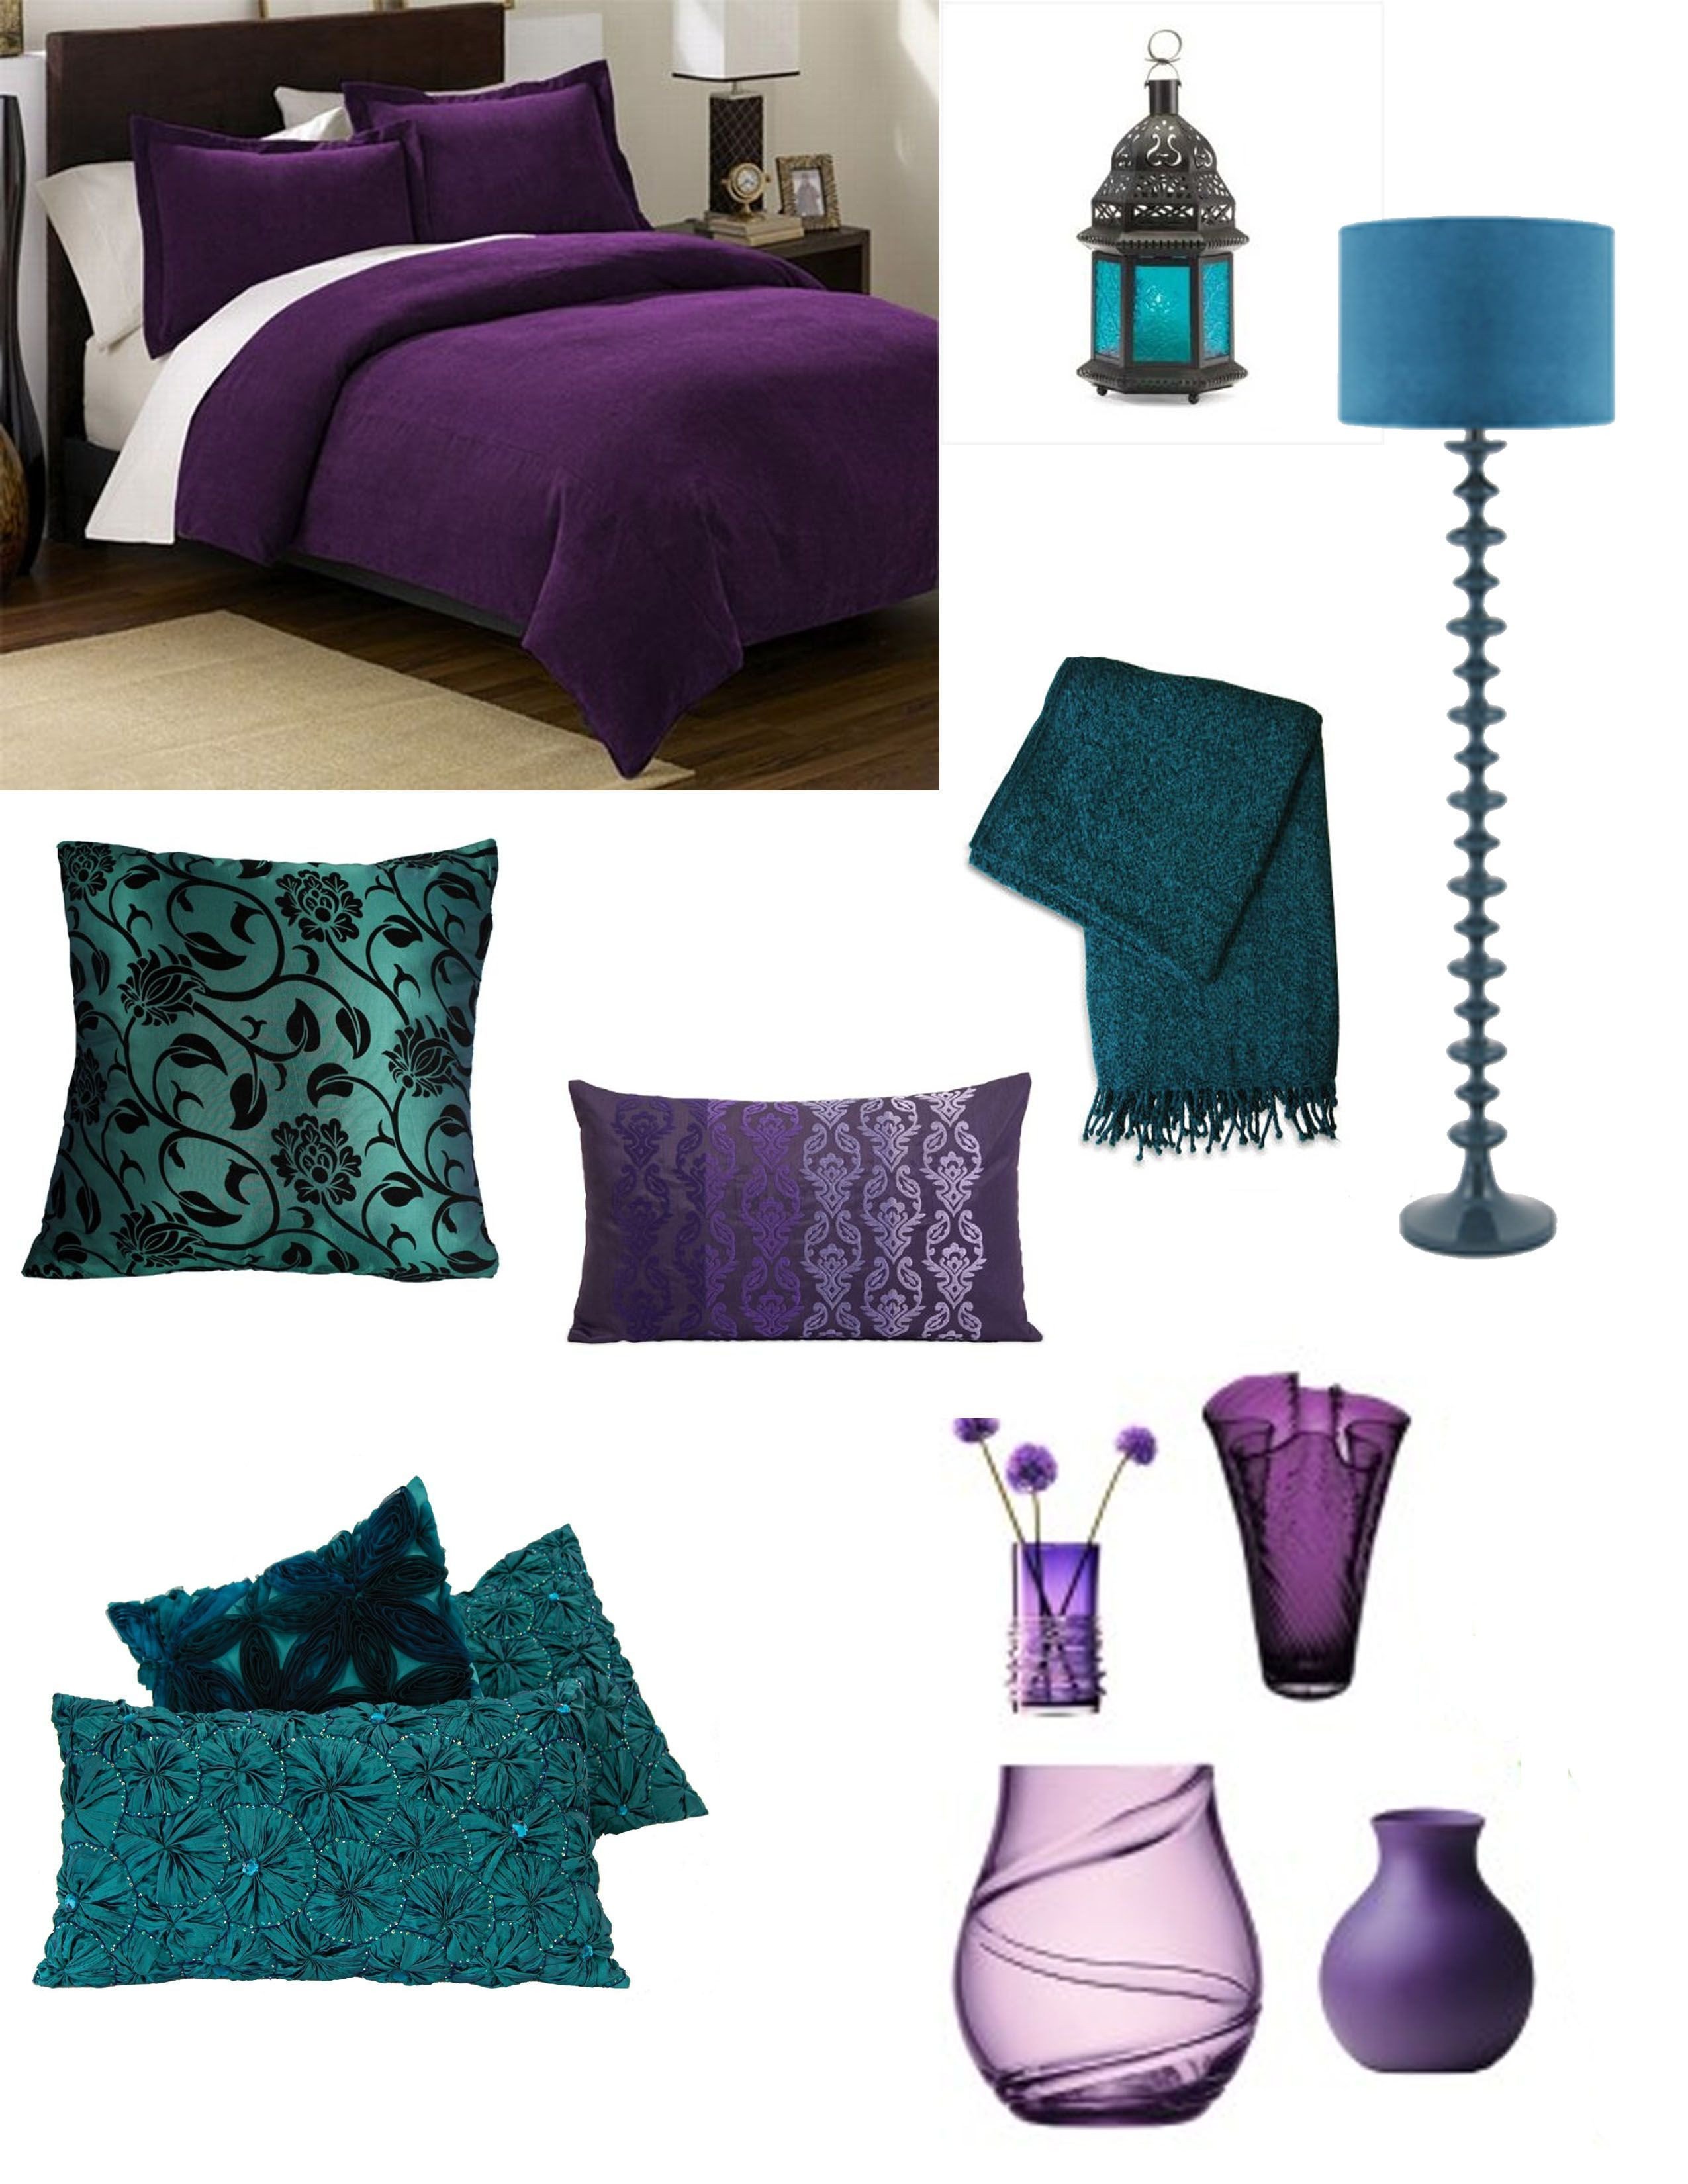 Purple and Silver Bedroom Best Of Purple and Teal Bedroom Needs some Black and Maybe A Red